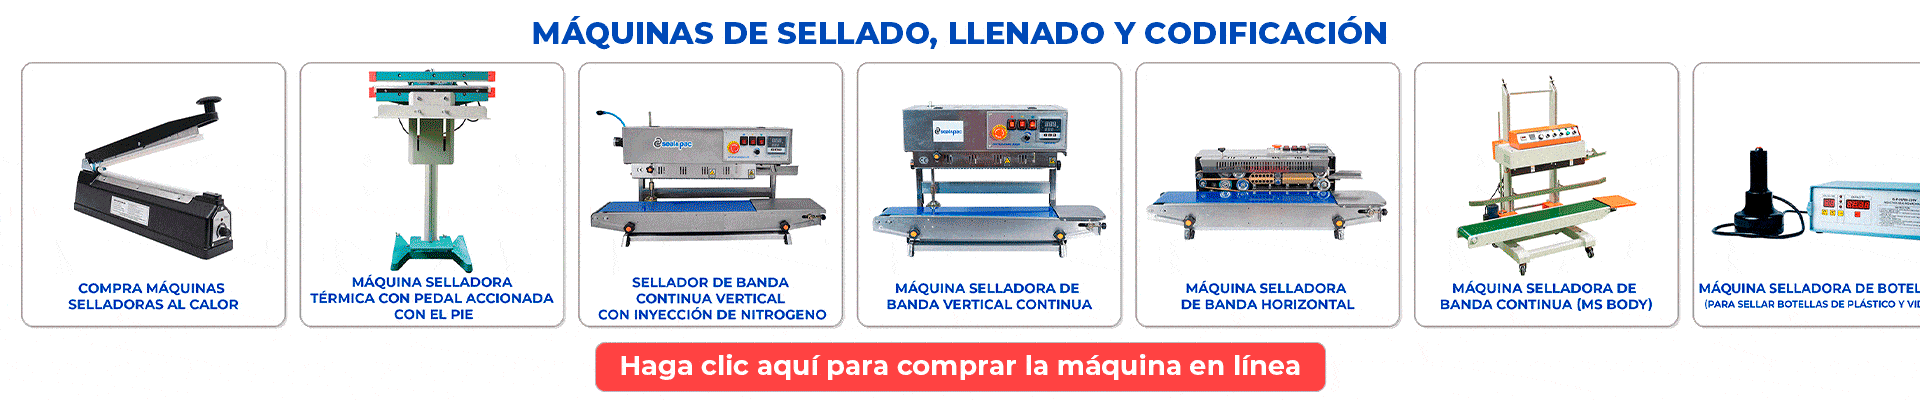 Sealing, Filling and Coding Machines